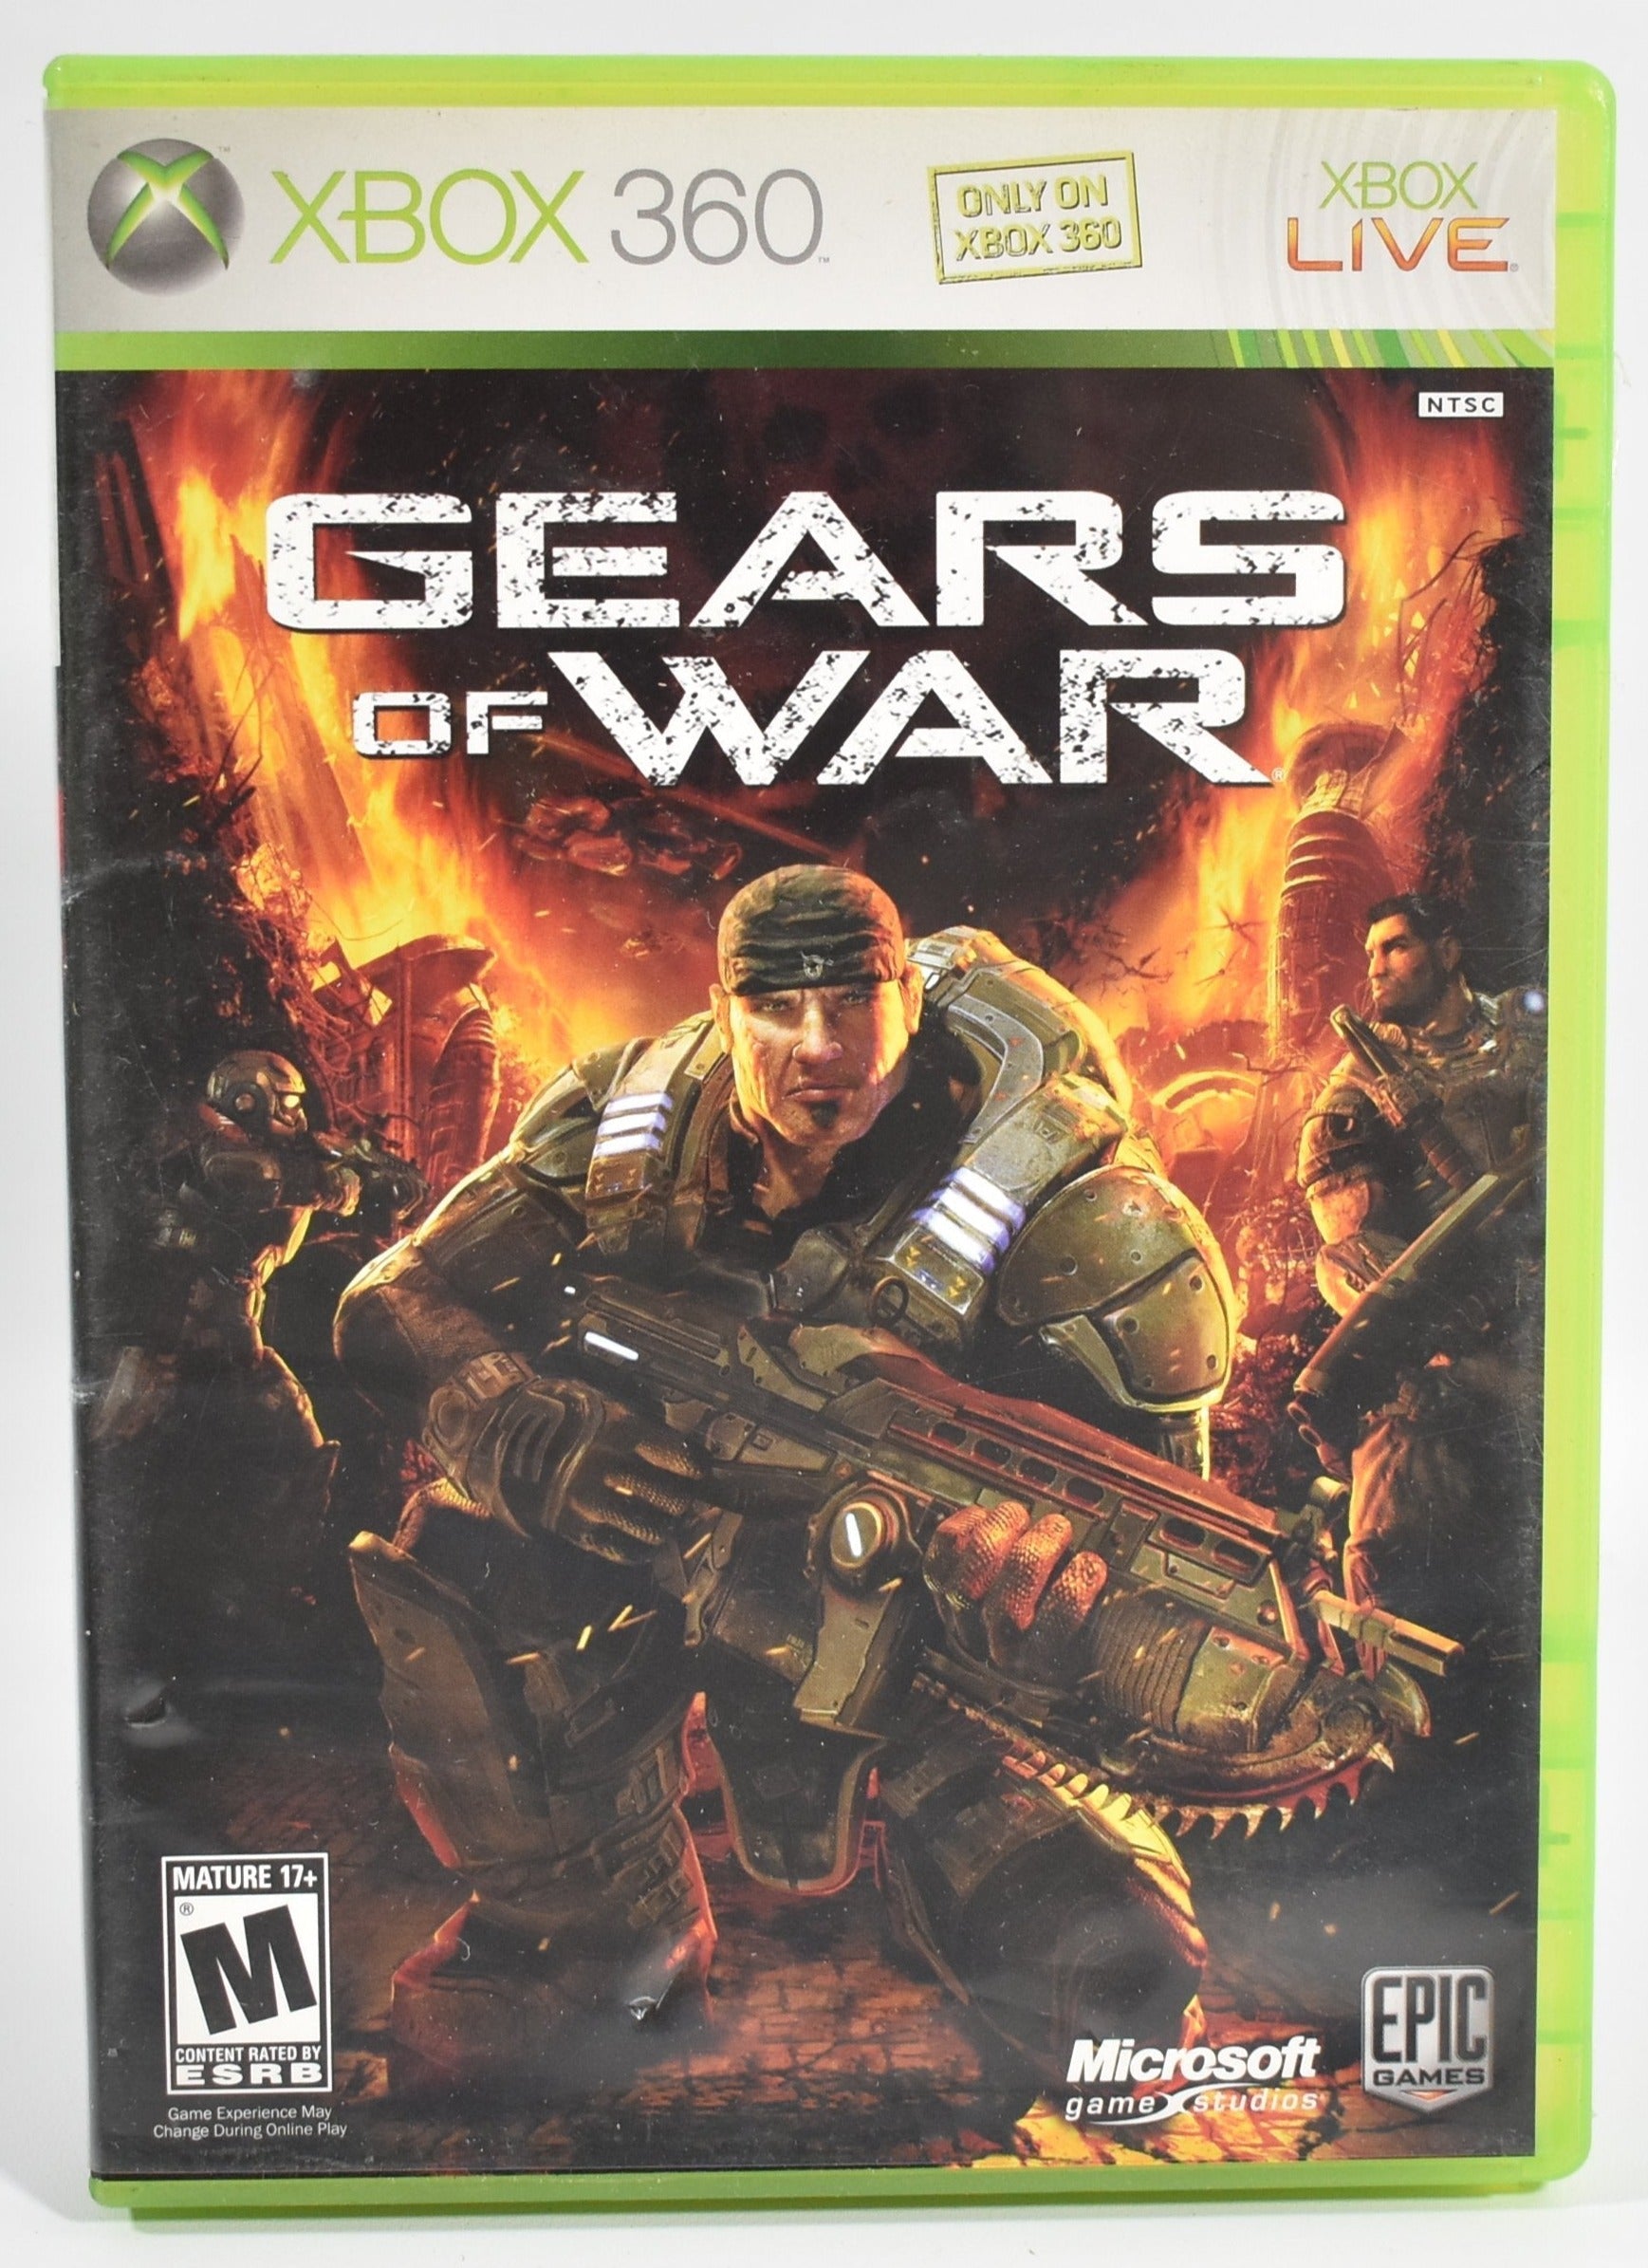 Xbox 360 Video Game Gears of war Used